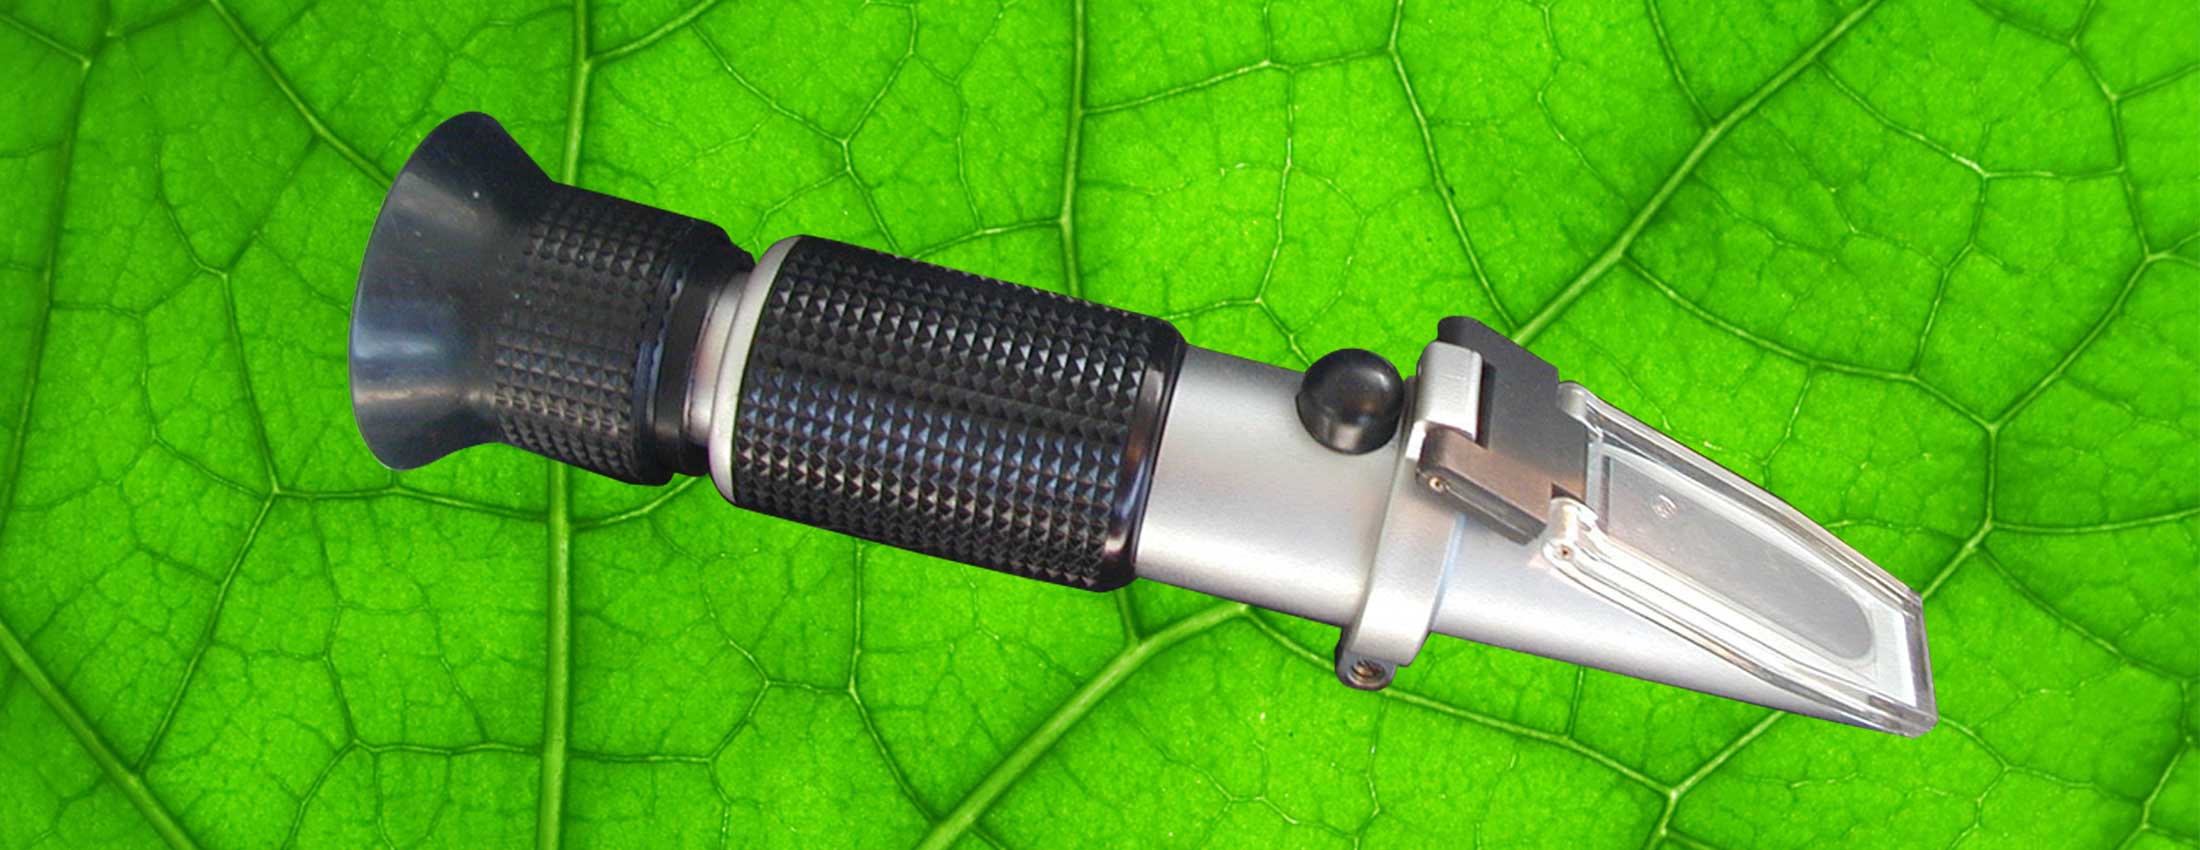 Ten Reasons to Own A Refractometer